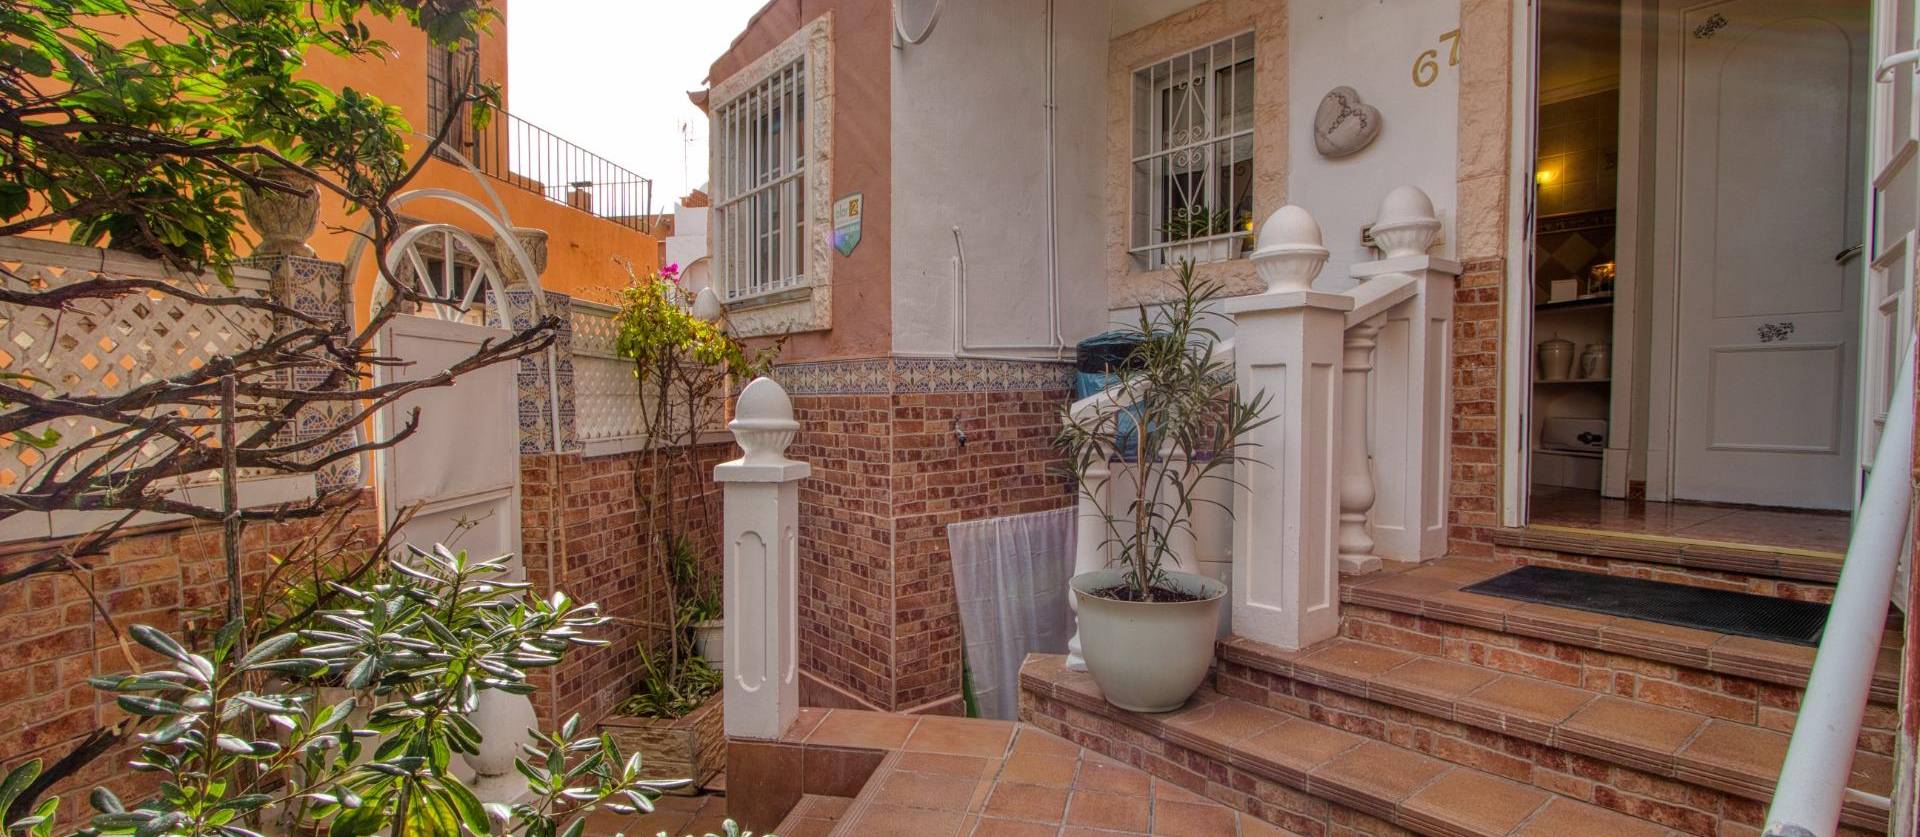 Sale - Terraced house - Torrevieja